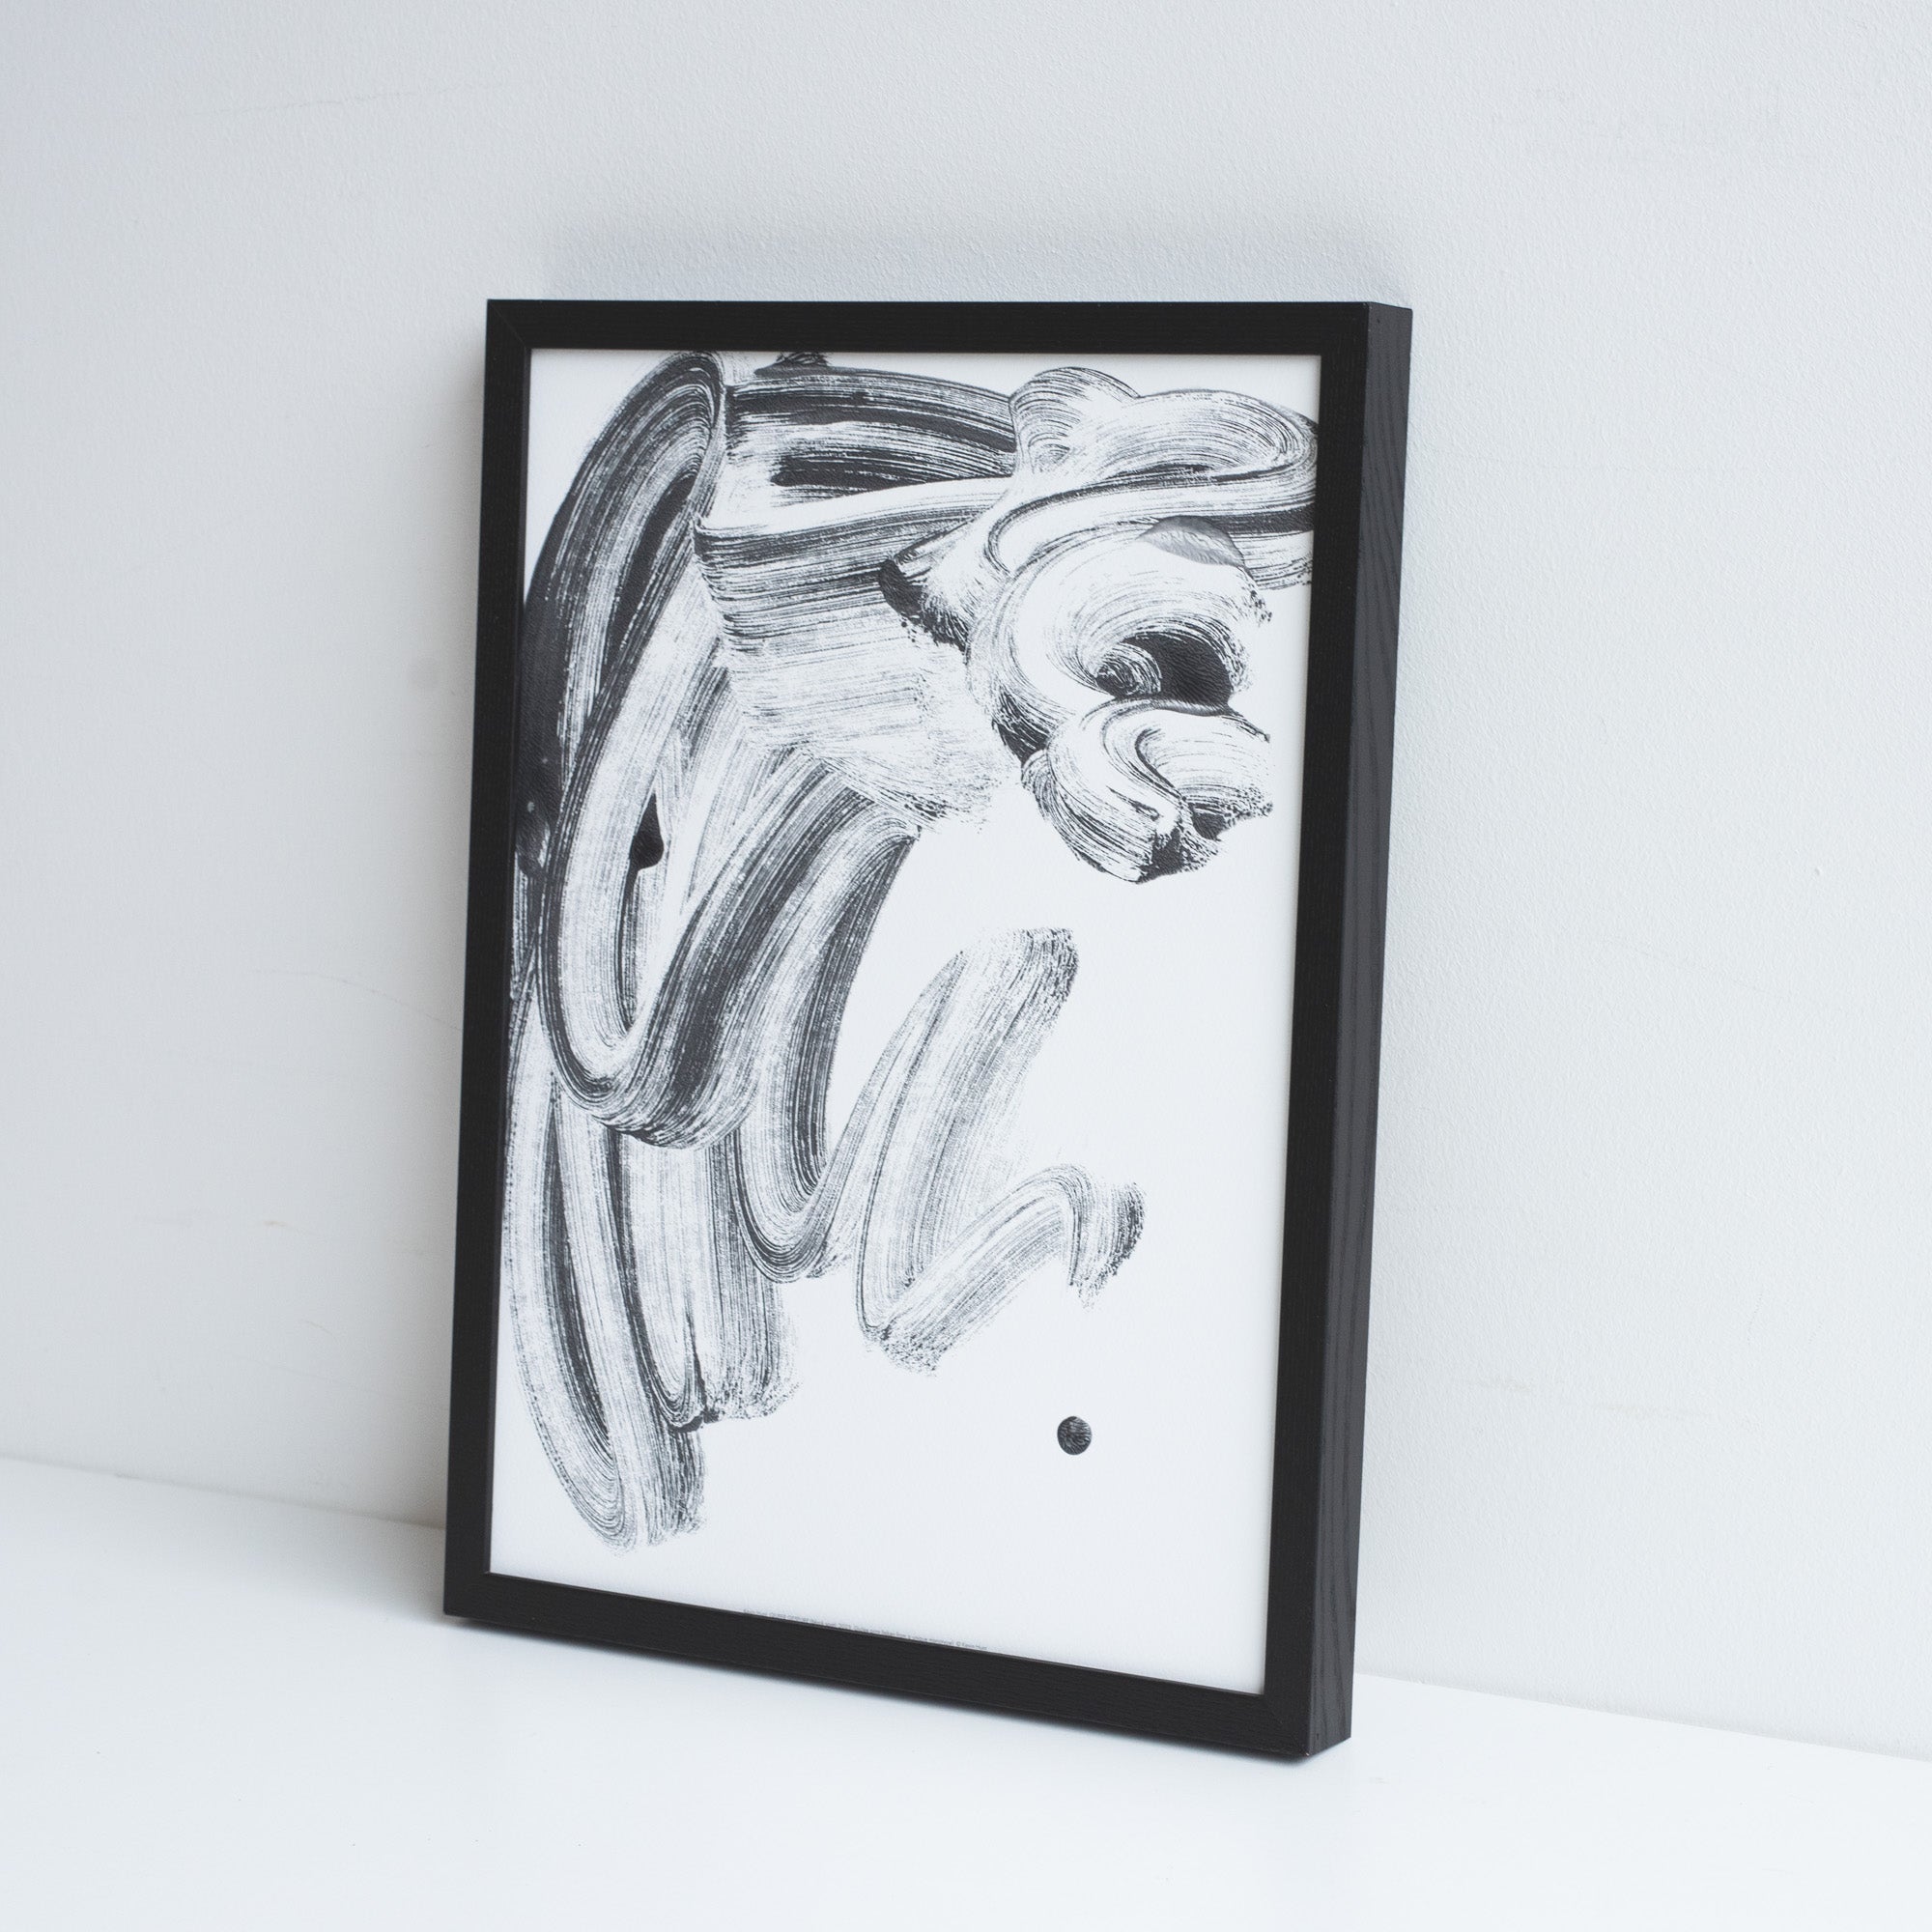 Printed reproduction of a unique Monotype by Kevin Hunt, placed in a black frame leaning against a white wall.